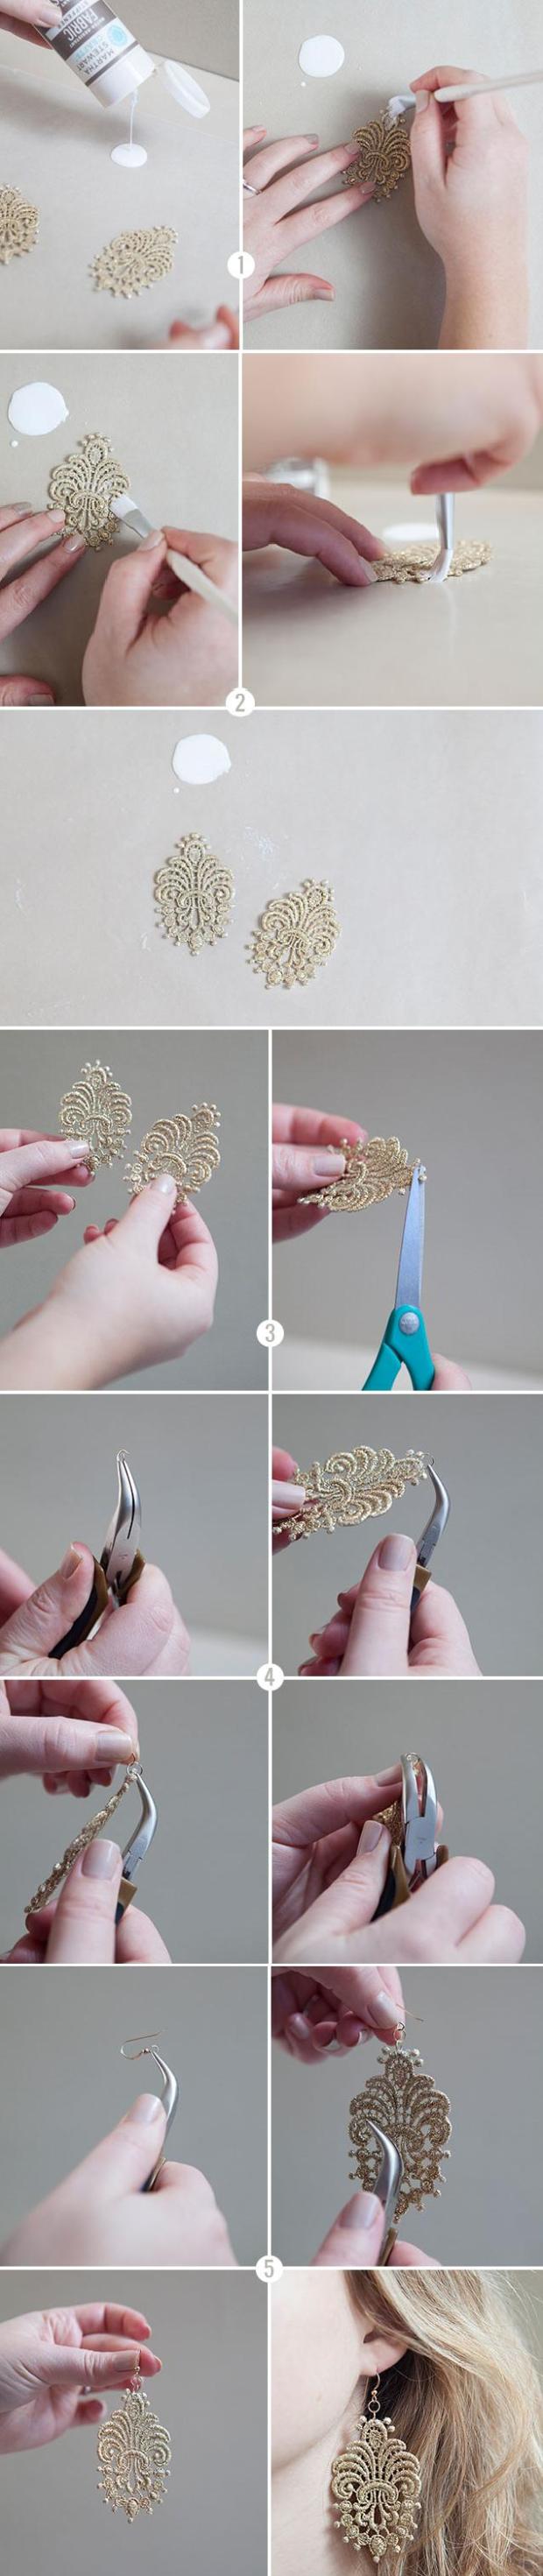 15 Inspiring DIY Projects That Use Lace